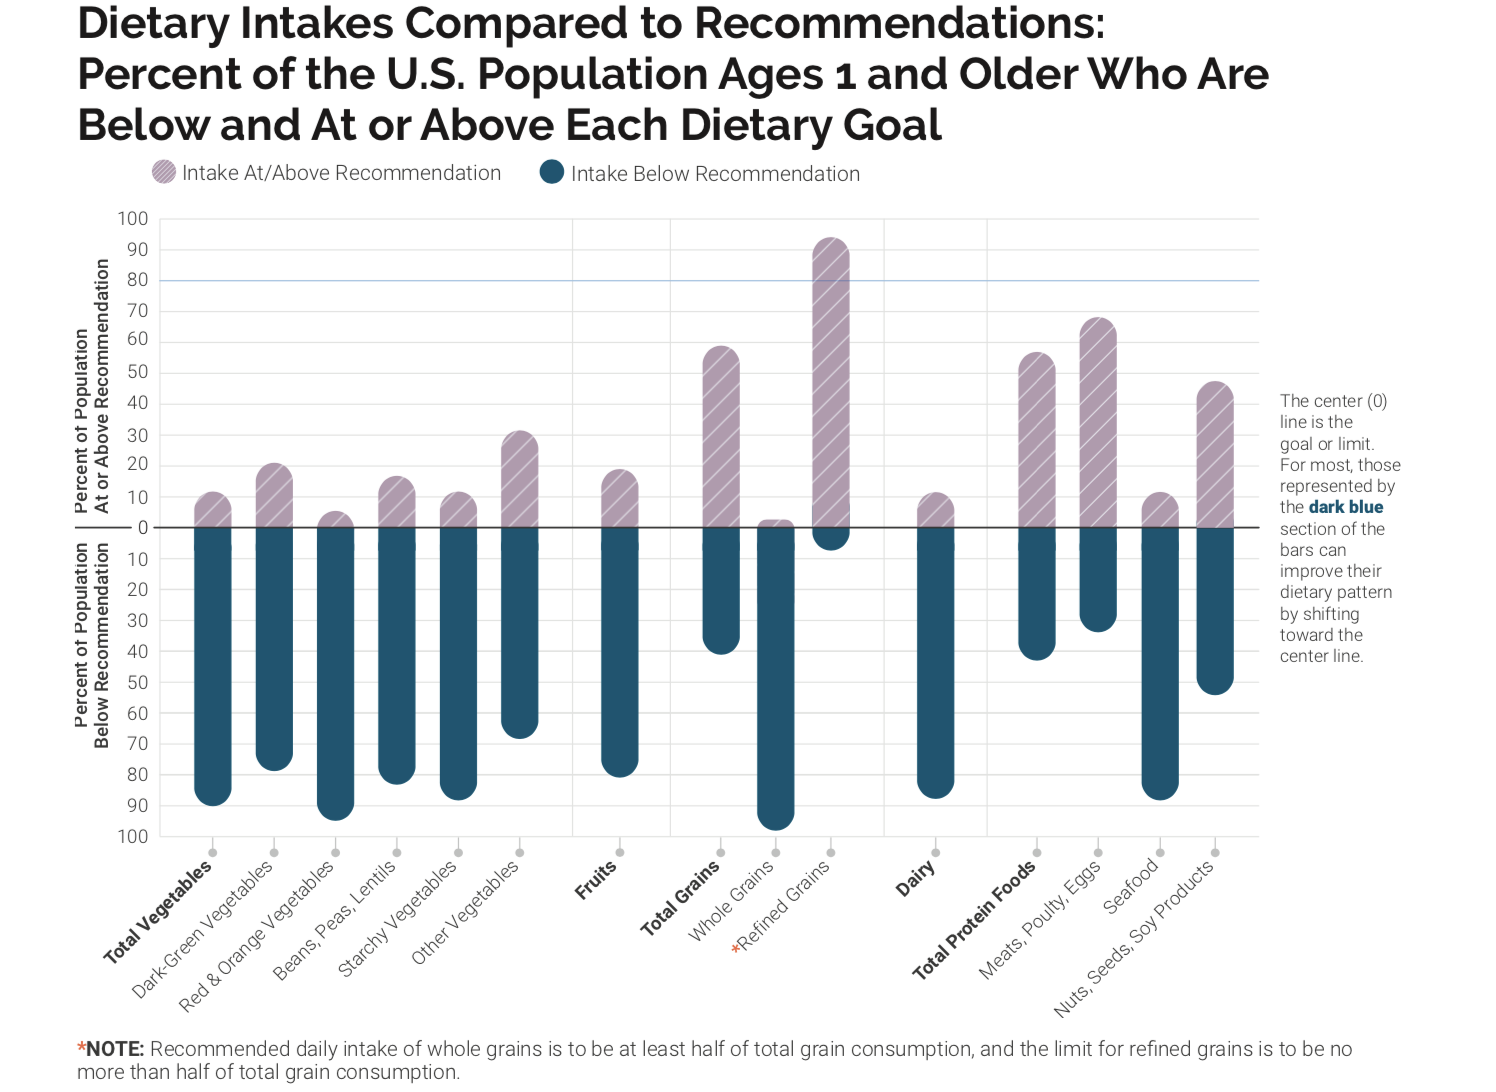 This bar graph shows the percentage of U.S. population ages 1 and older who are below or at or above each dietary goal. It shows that most Americans don't consume enough vegetables, fruits, whole grains, dairy products, seafood, or nuts, seeds, or soy products.